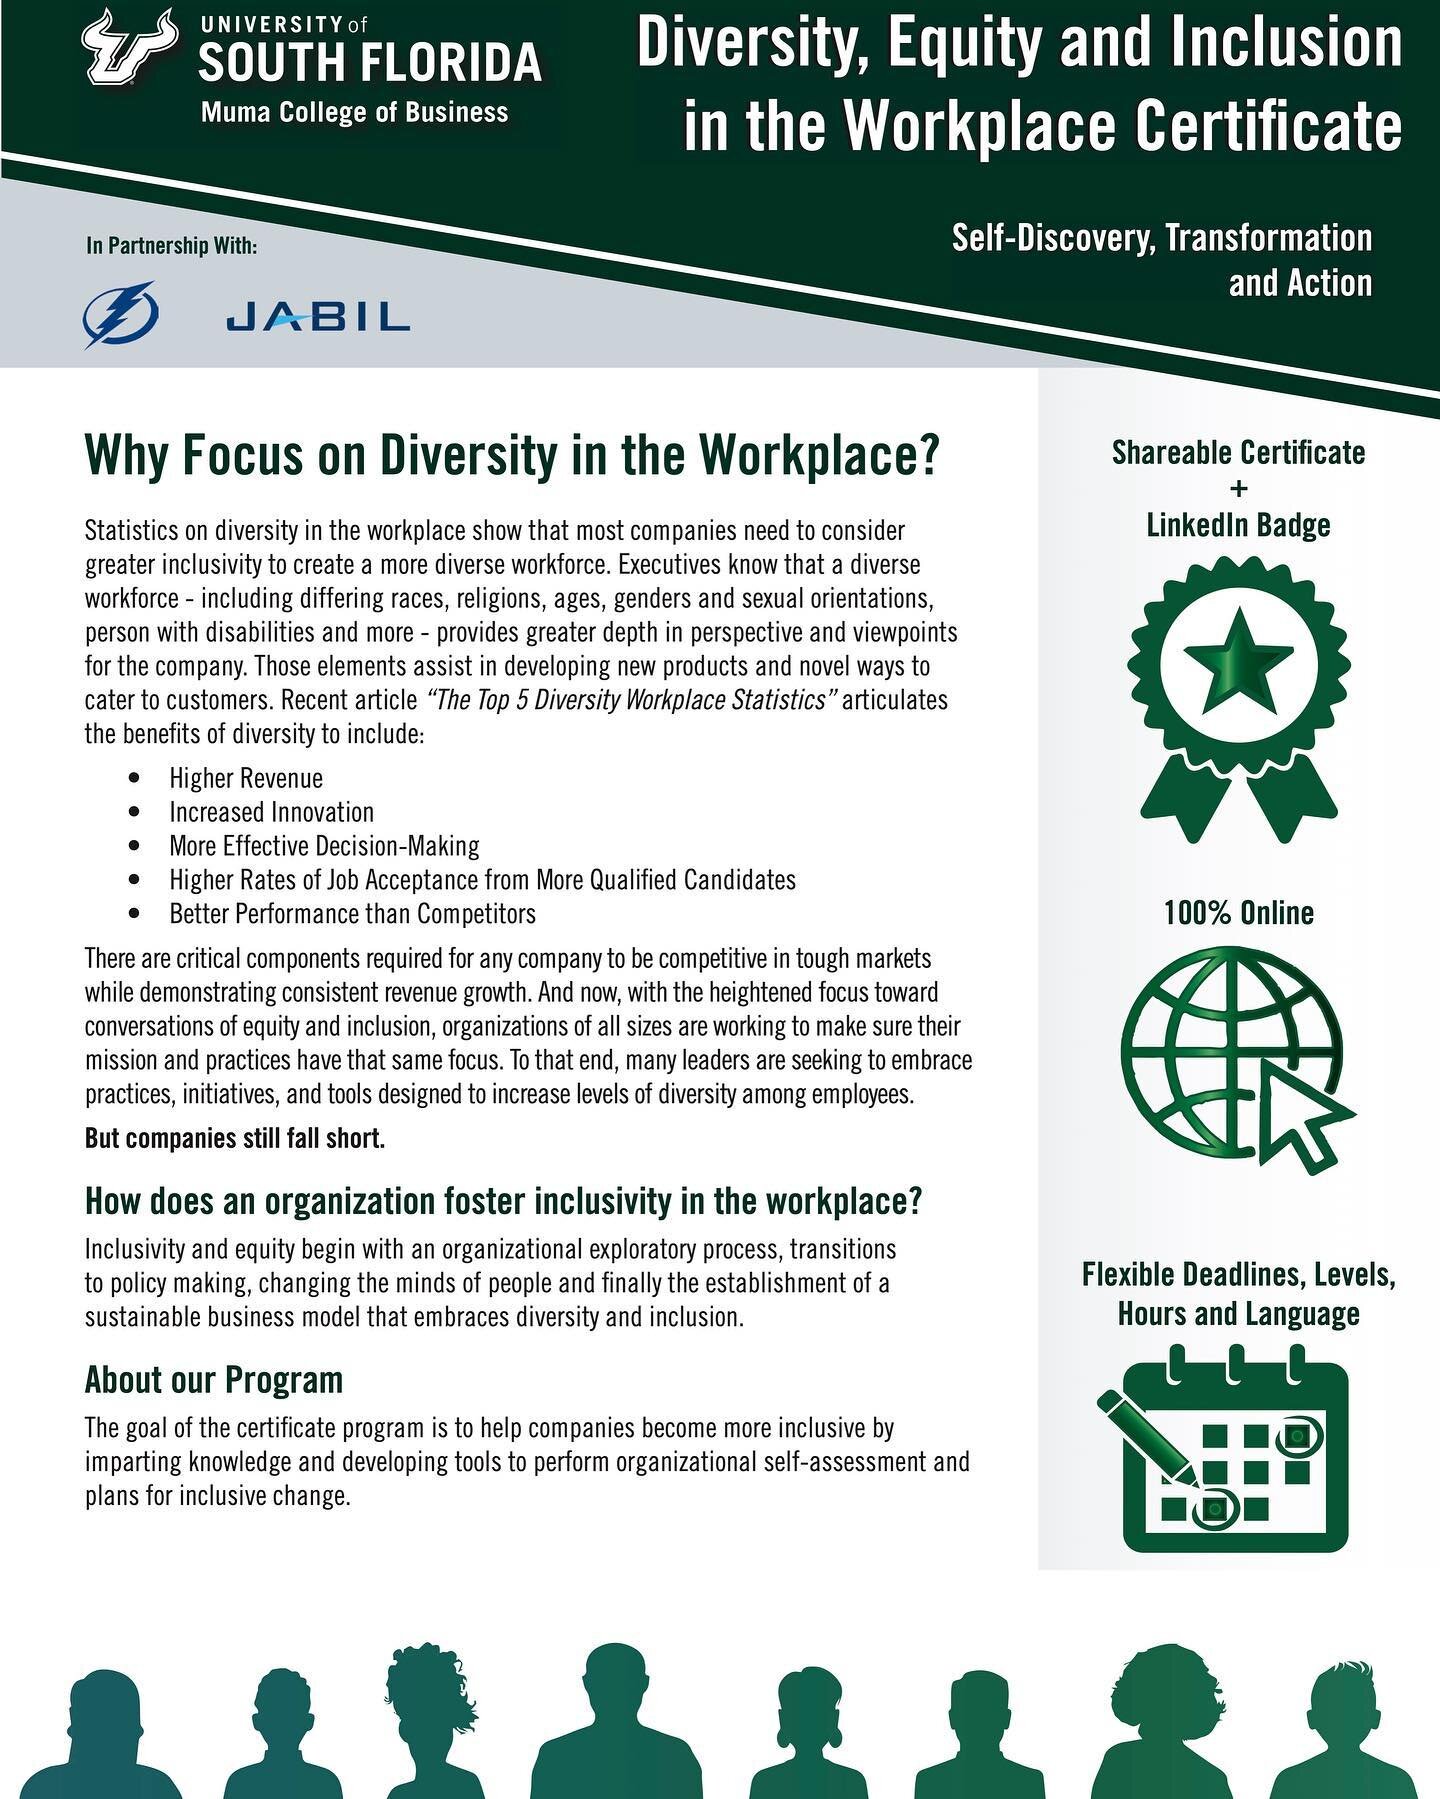 Diversity in the workplace is a topic of conversation that&rsquo;s more important ever. The USF Muma College of Business @usfmuma along with @tblightning and @jabilcircuit is offering a FREE virtual certification to learn more about what we allcan do